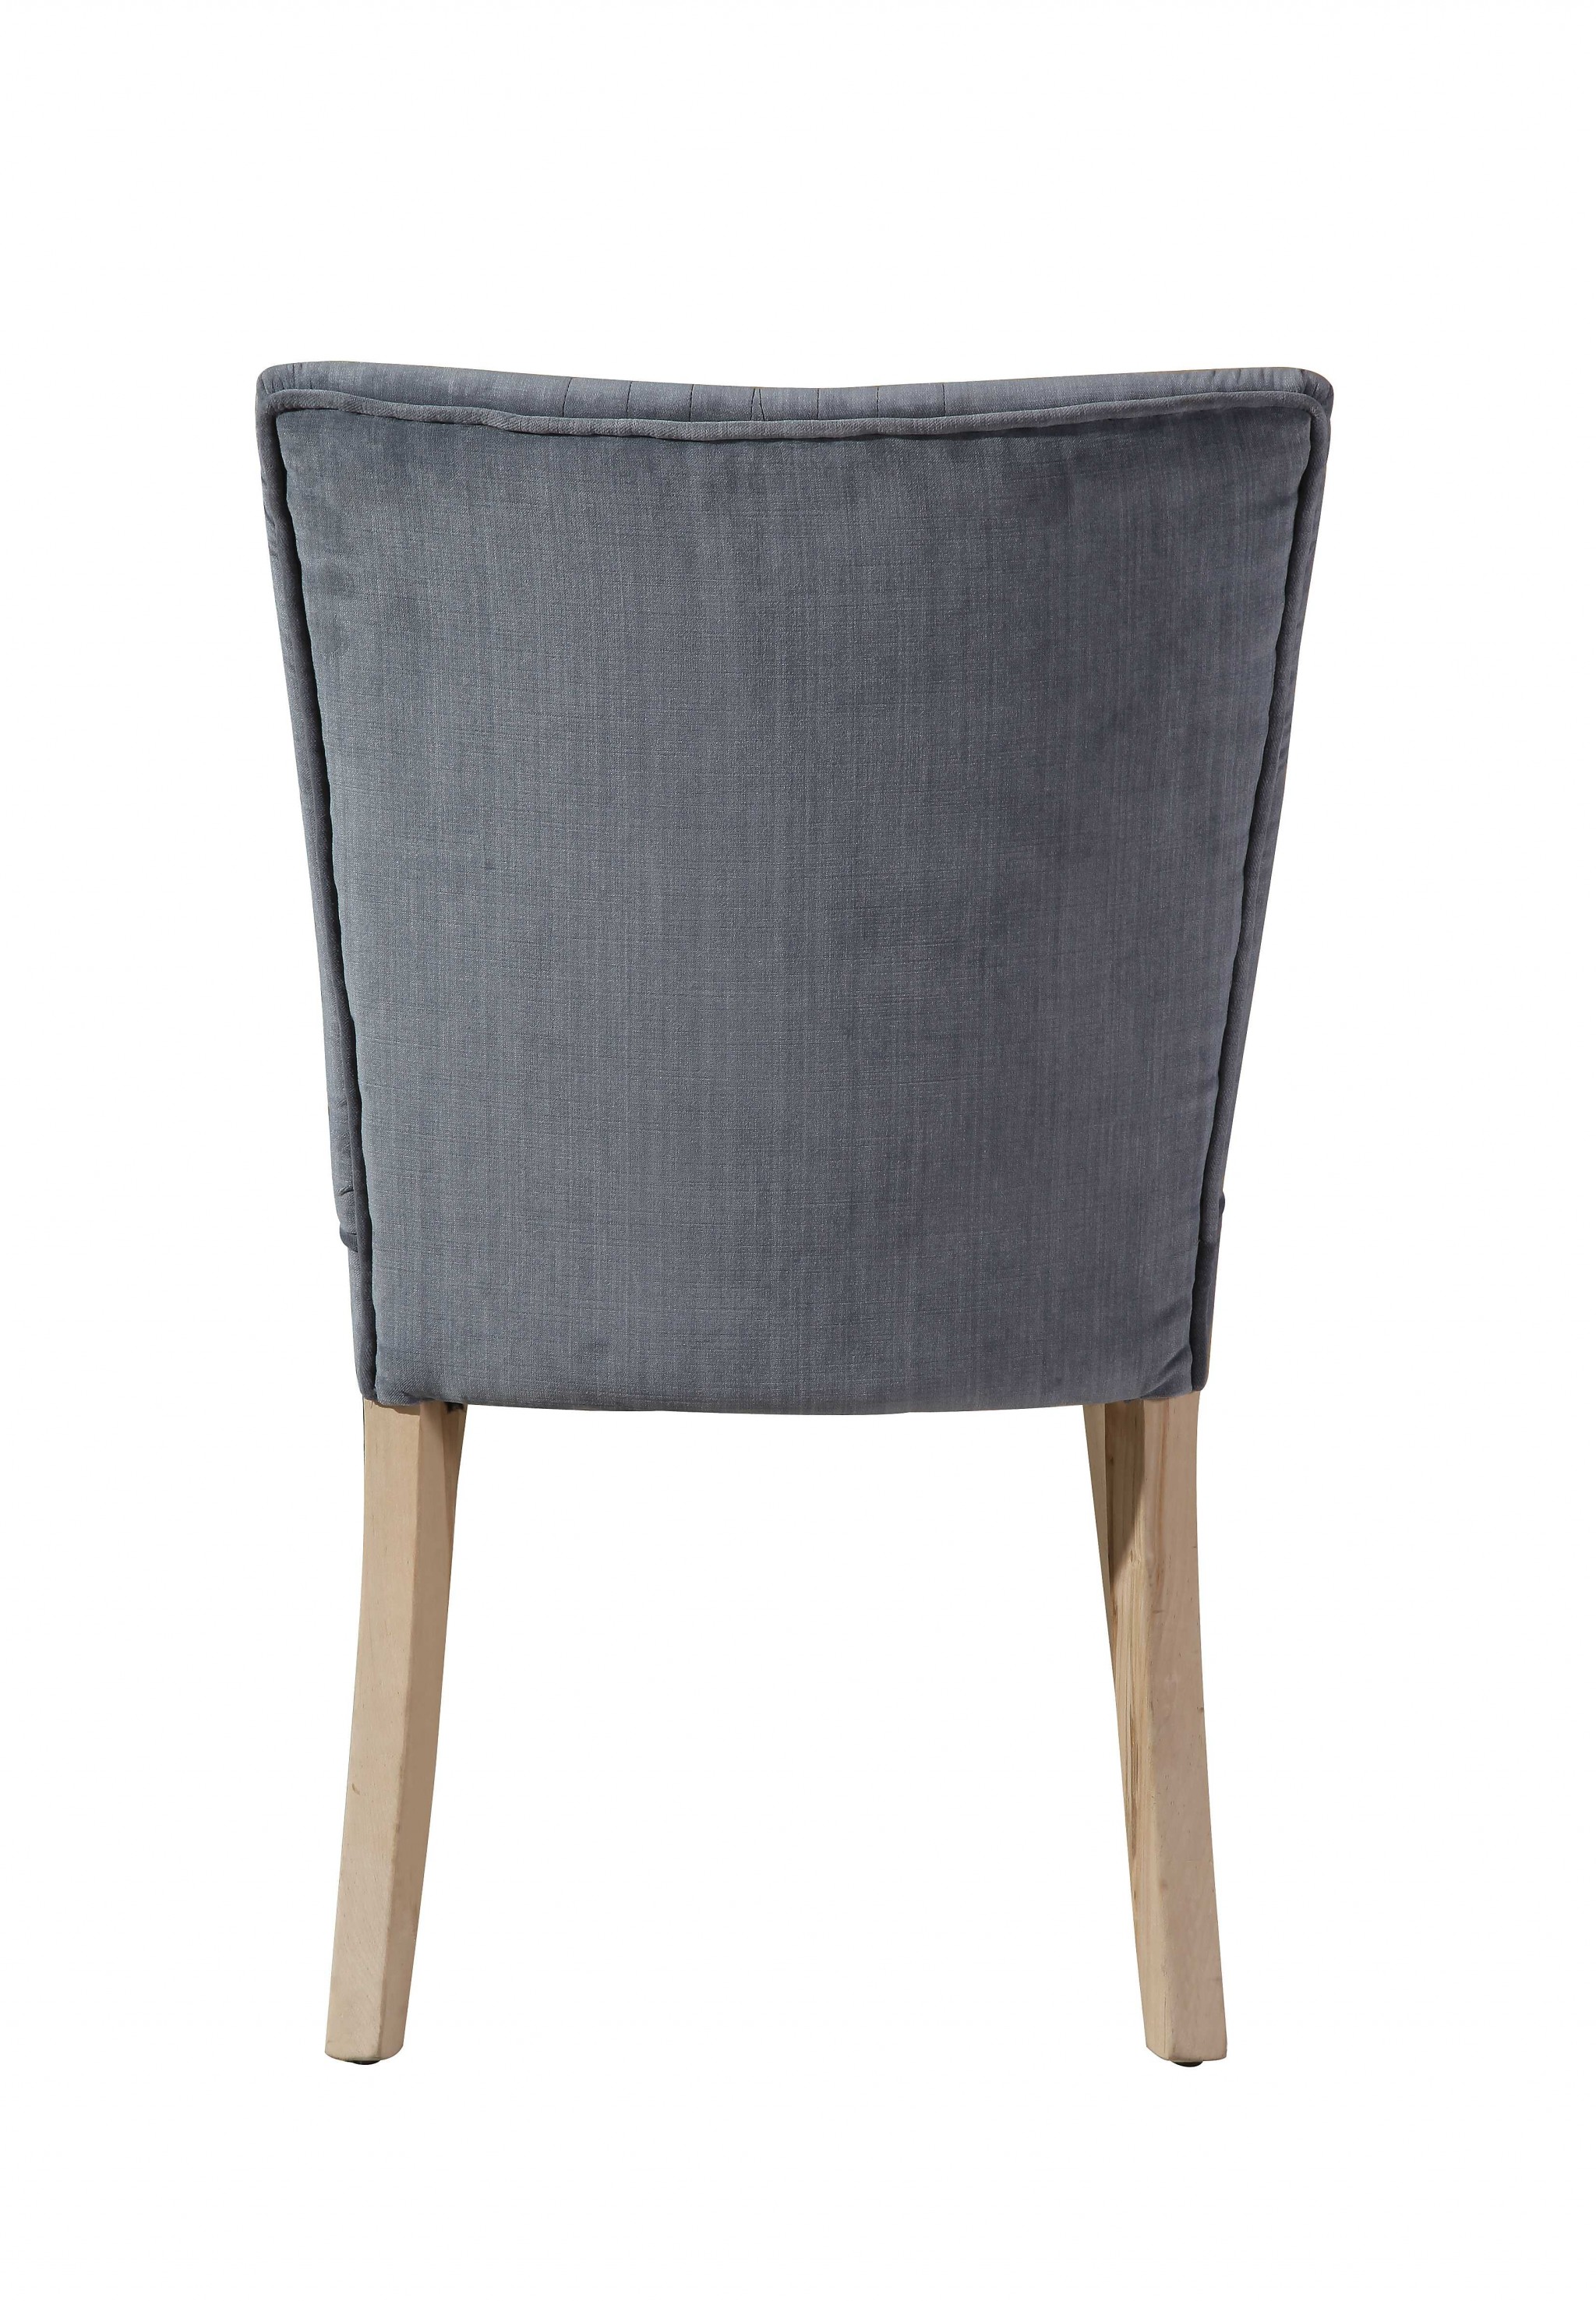 22" X 21" X 34" Blue Wood Polyester Dining Chair